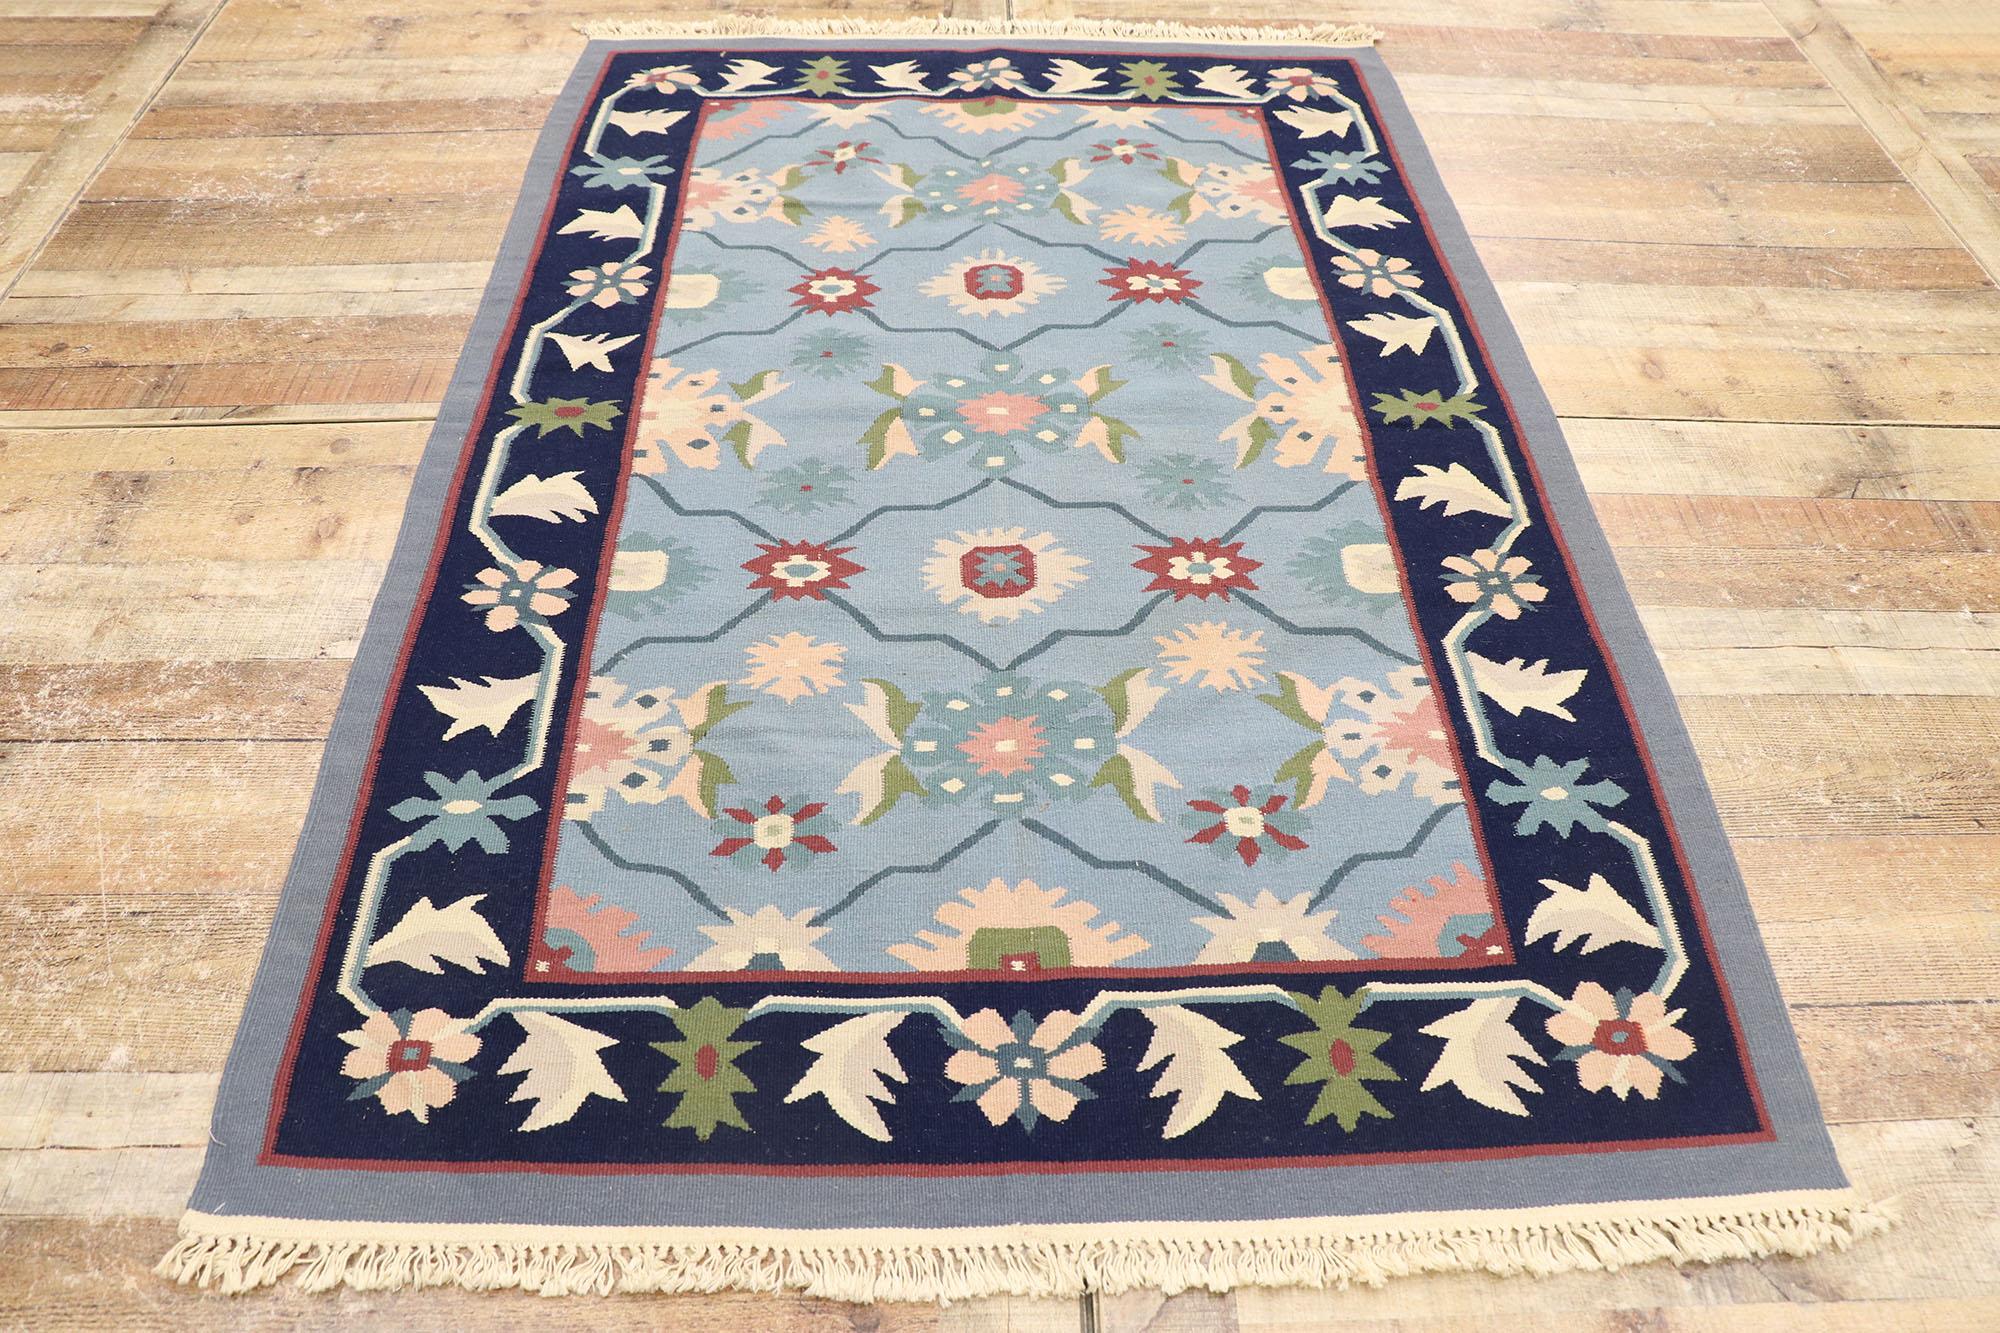 Vintage Romanian Floral Kilim Rug with Folk Art Cottage Style In Good Condition For Sale In Dallas, TX